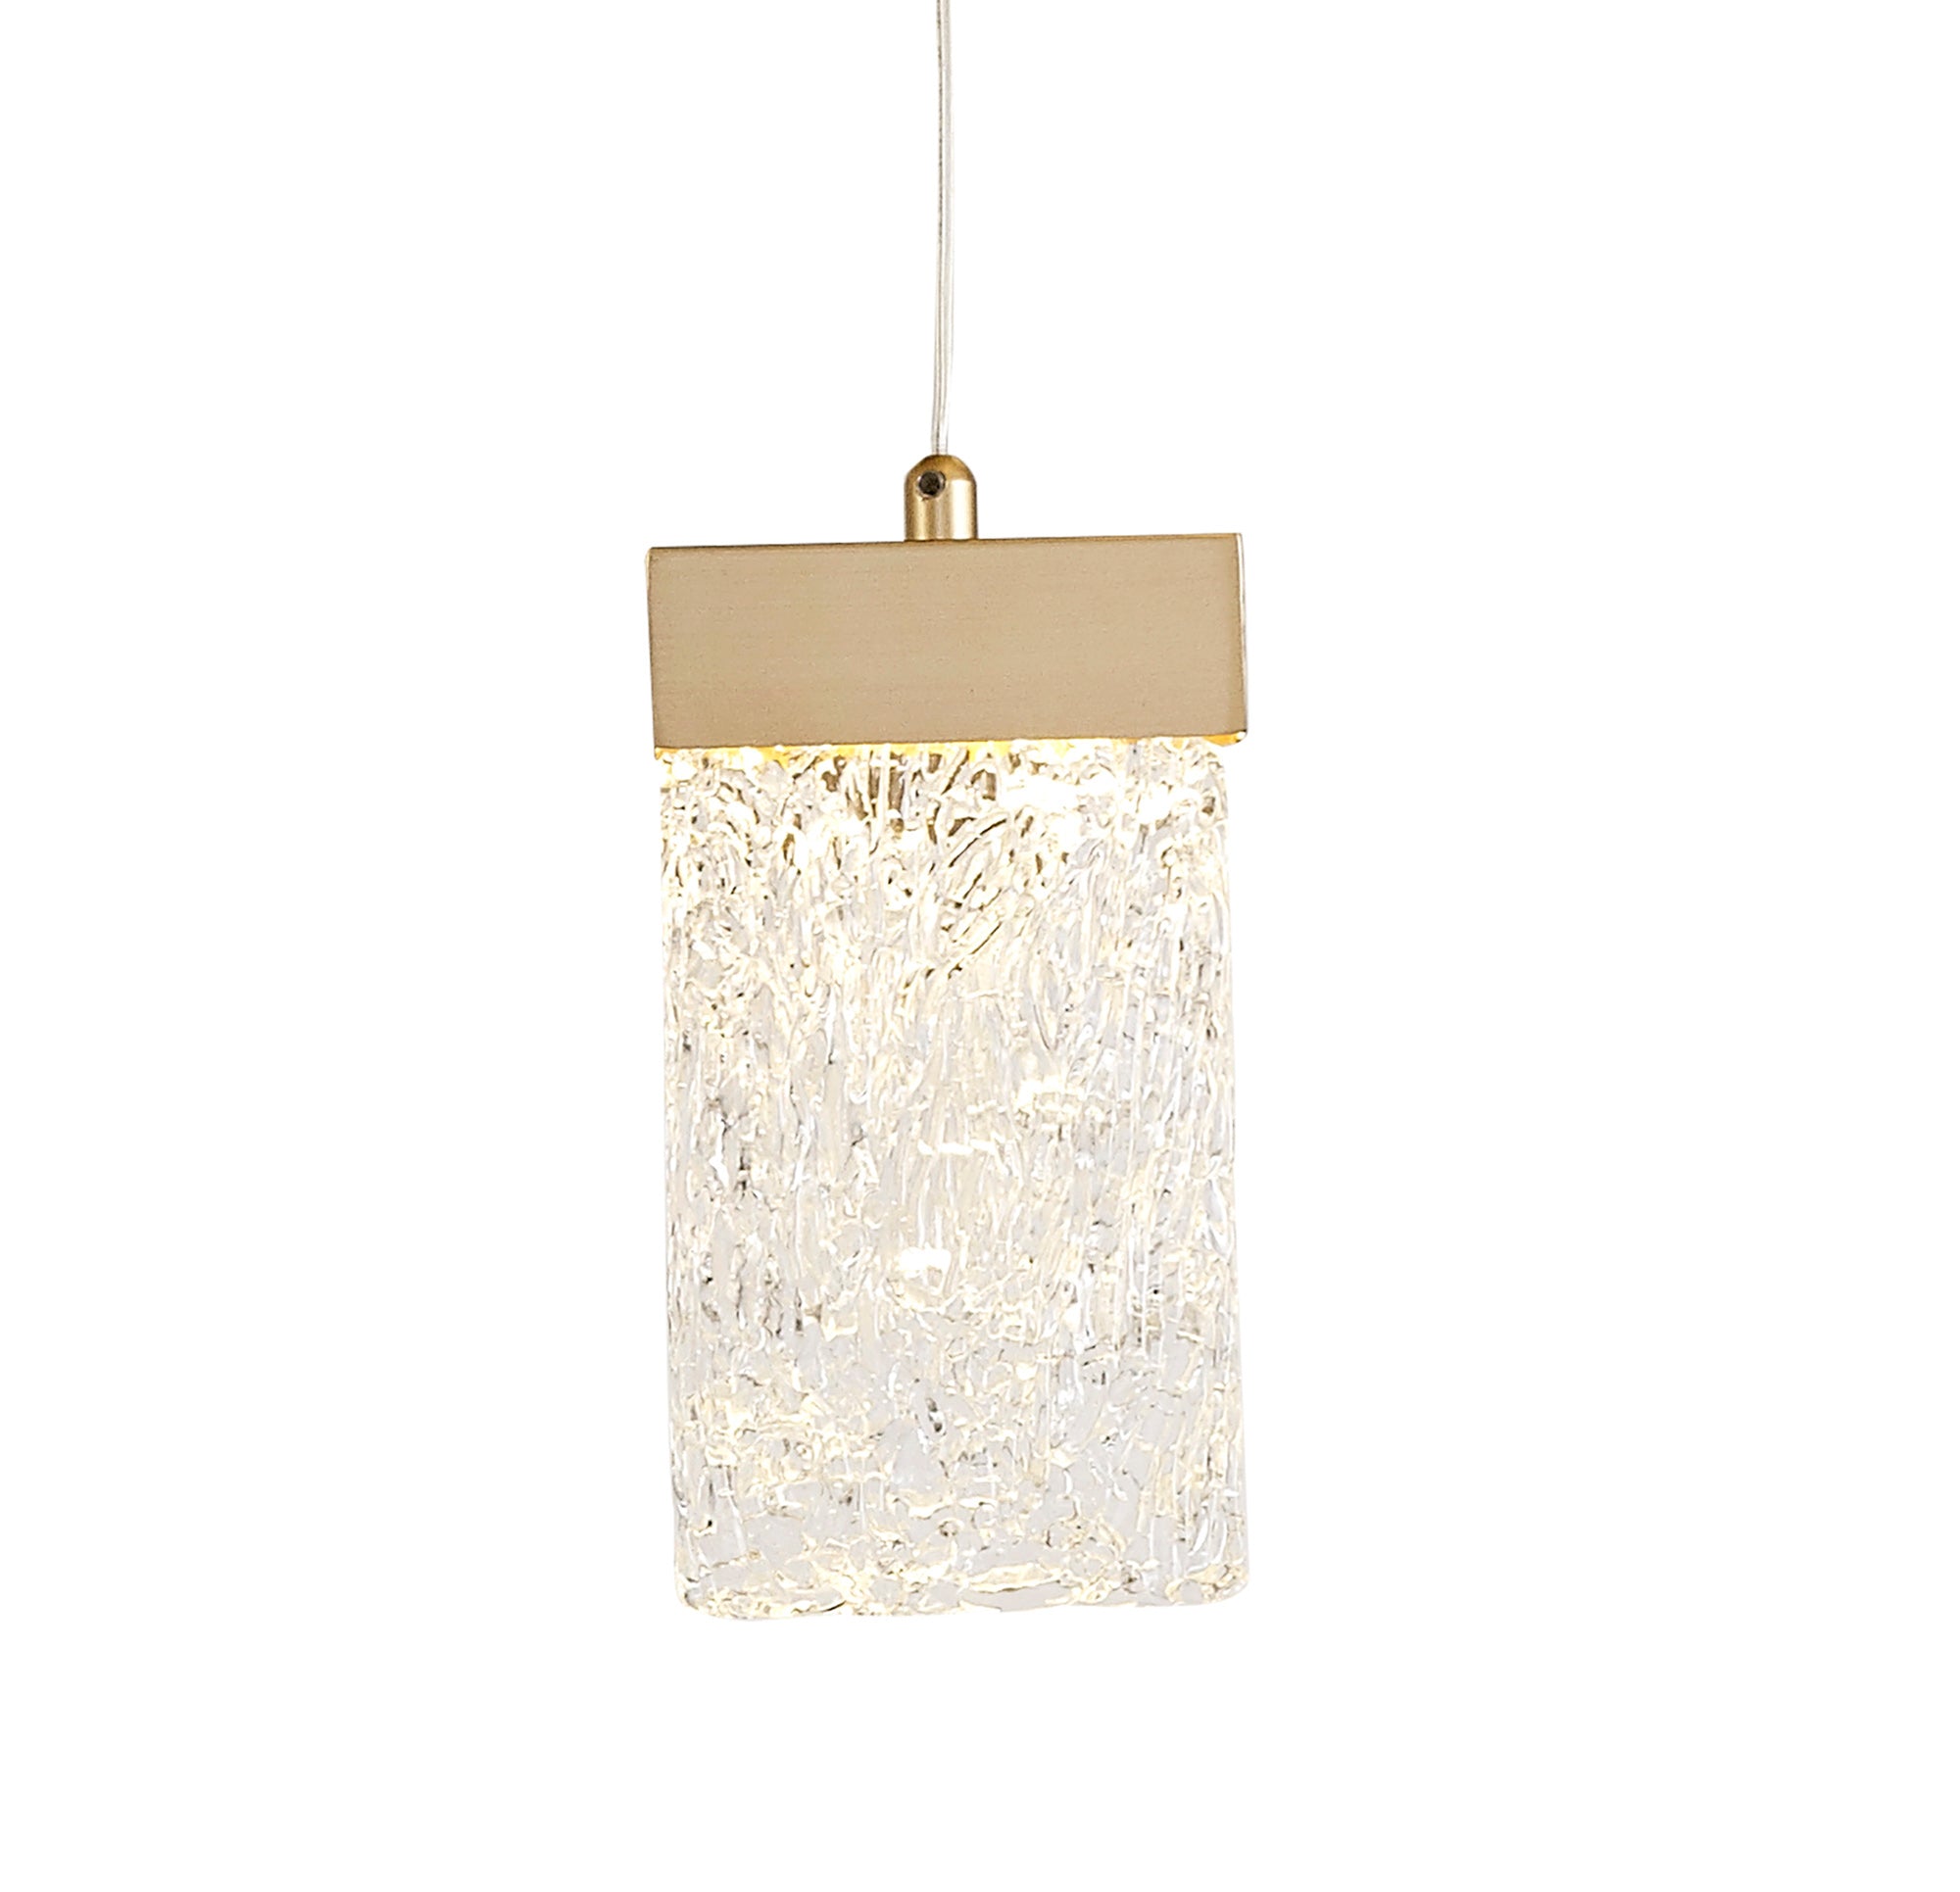 Barish Pendant Round 5 metre drop, 21 x 4.5W LED, 3000K, 3360lm, Painted Brushed Gold, 3yrs Warranty Item Weight: 34.2kg